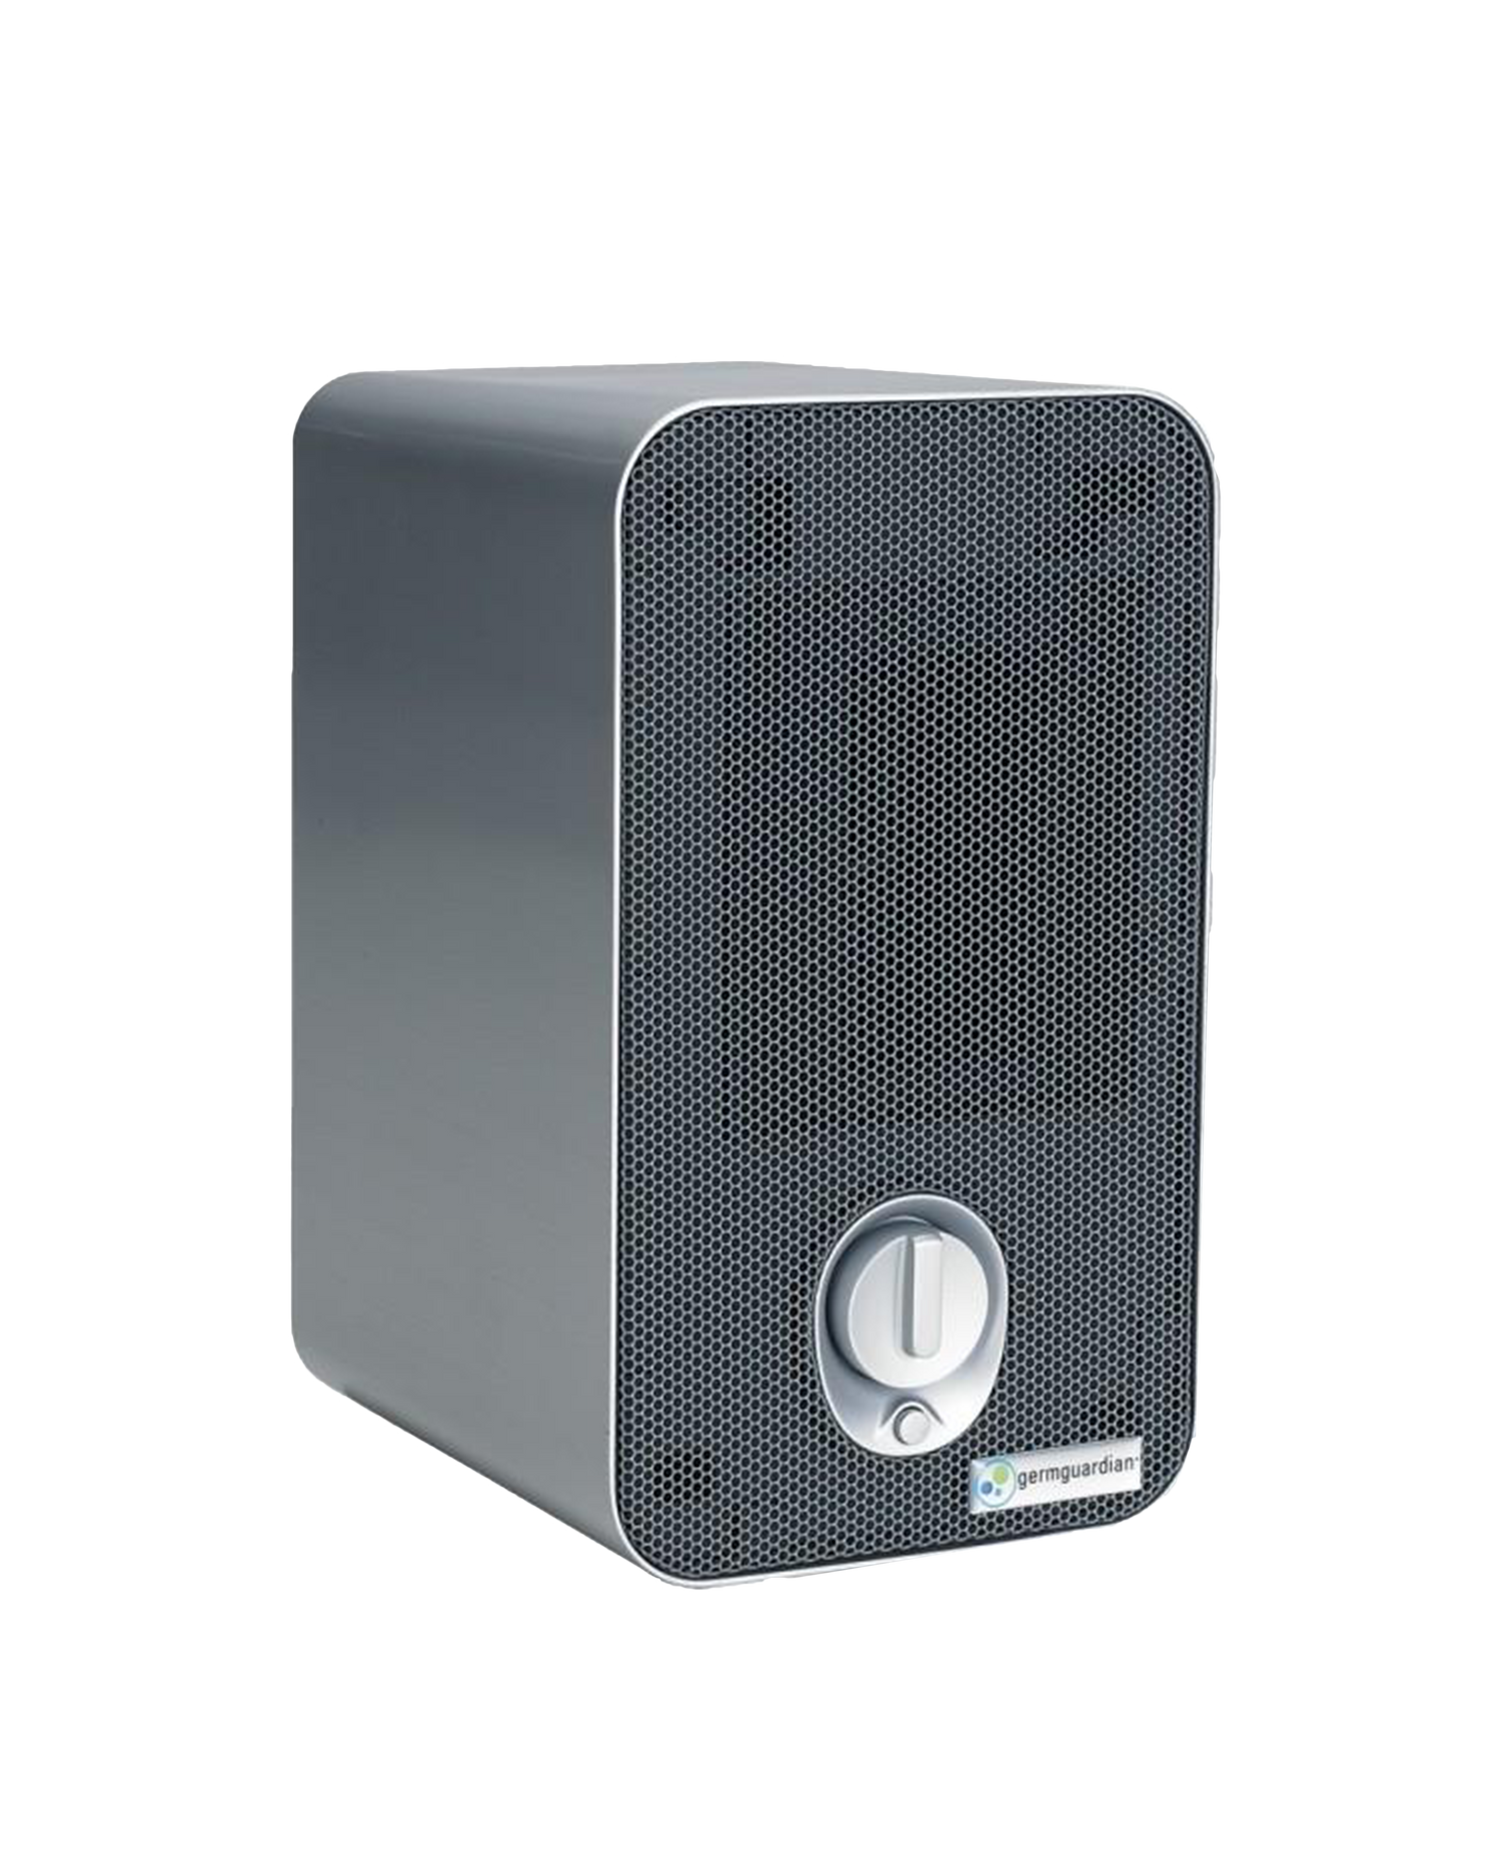 3-in-1 HEPA Air Purifier with UV Sanitizer